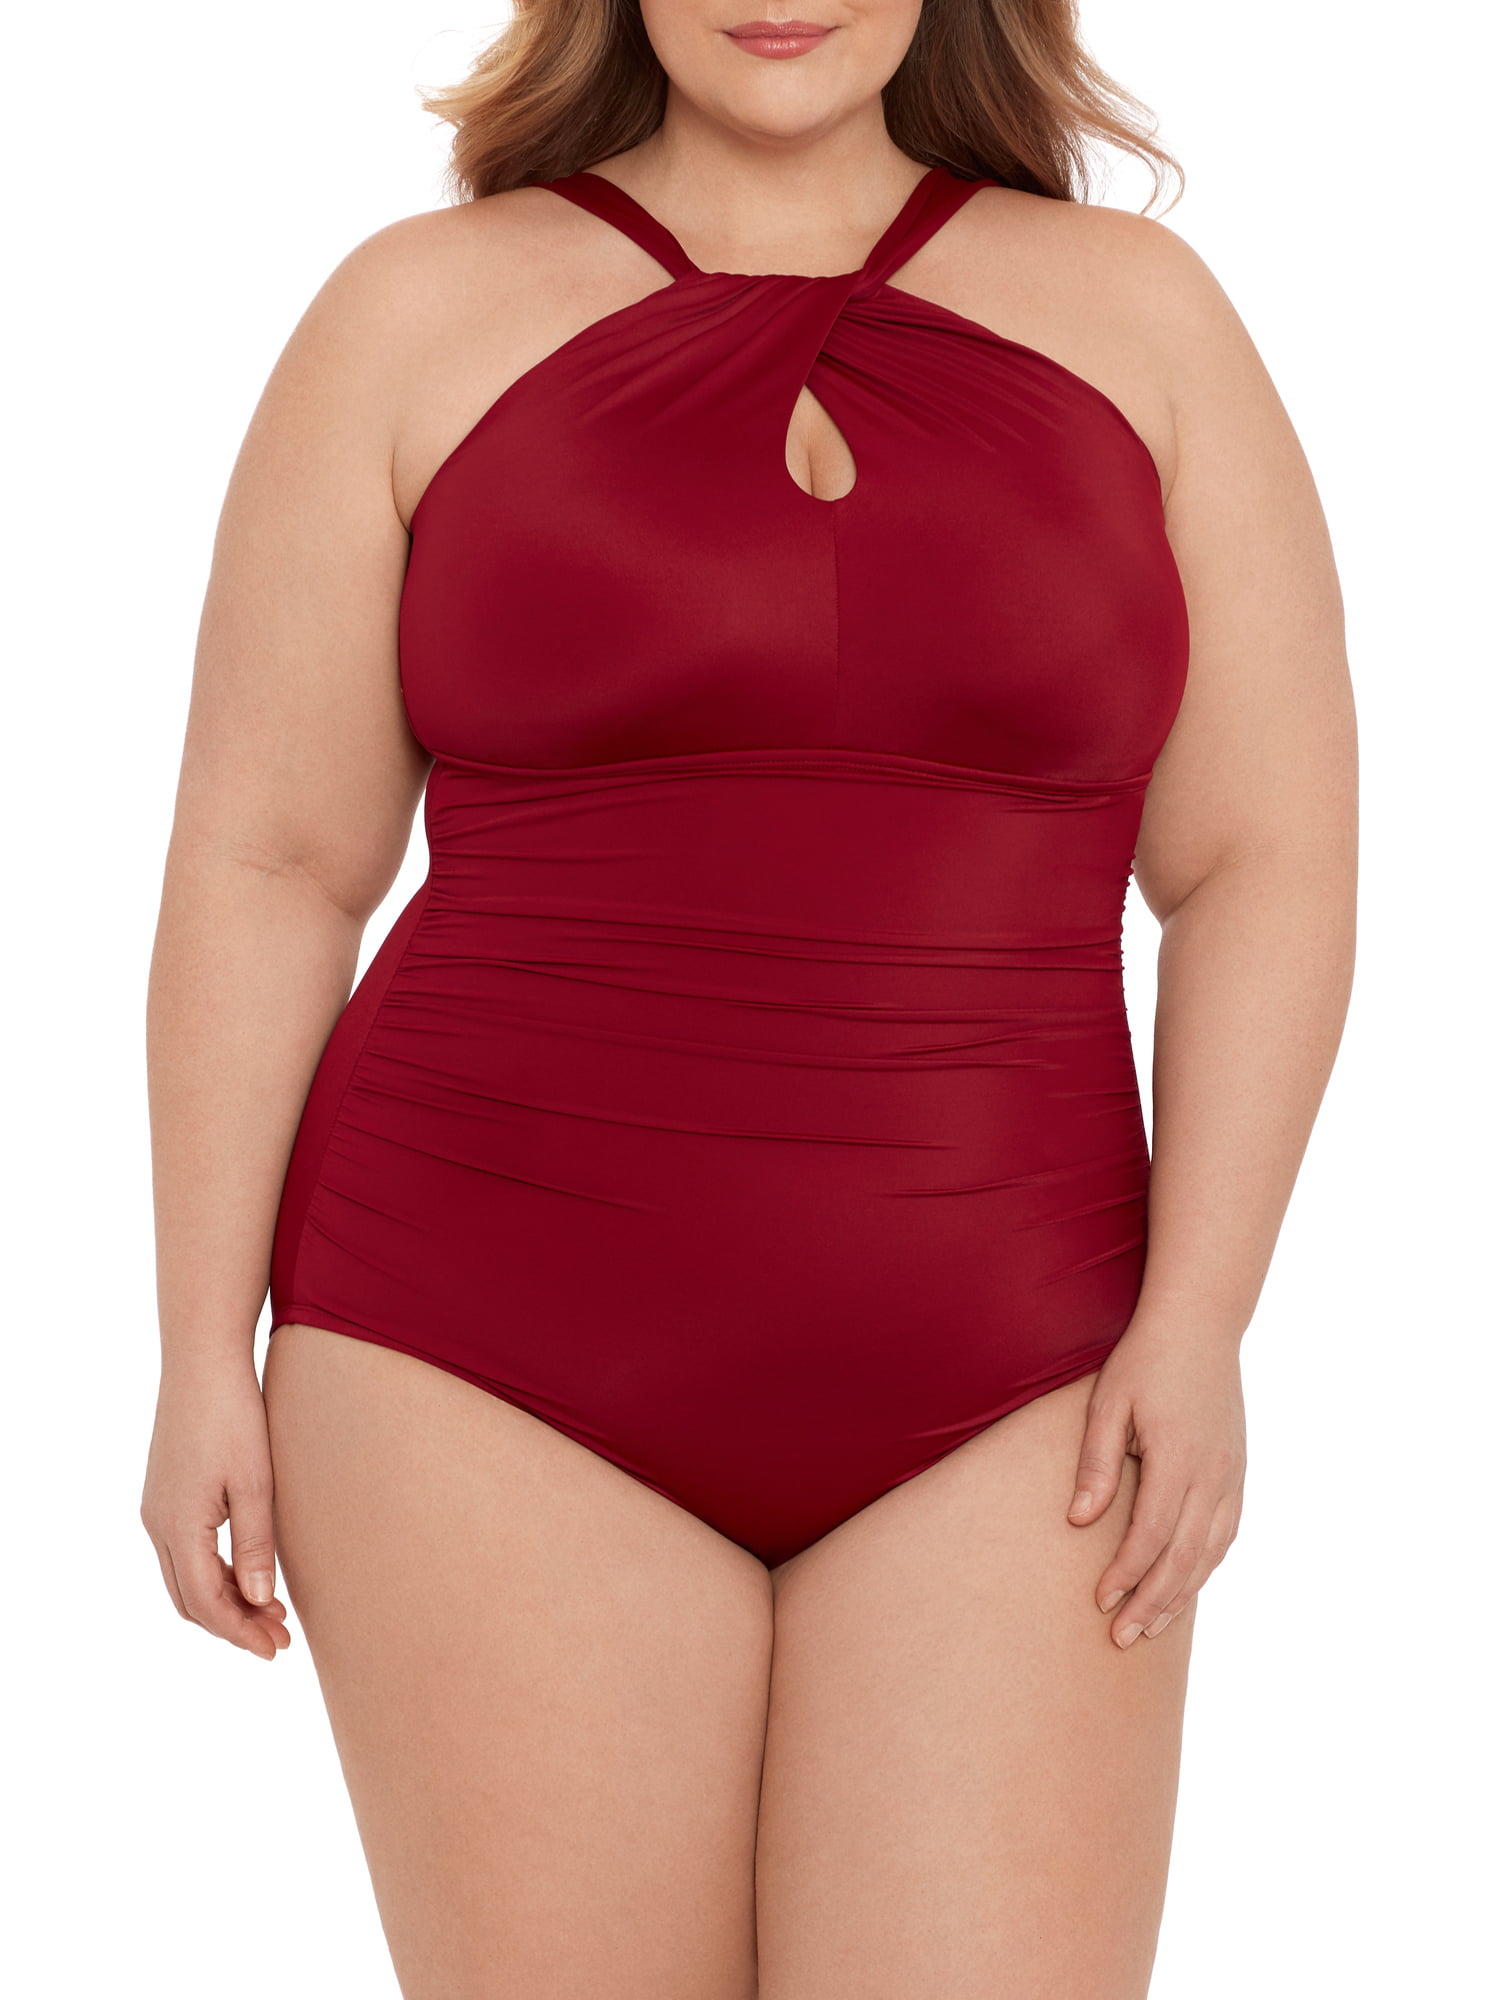 Buy Blooming Jelly Women's Tummy Control Swimsuit One Piece Full Coverage  Plus Size Bathing Suit Retro Ruffle Swimwear, Red and Black, XX-Large at